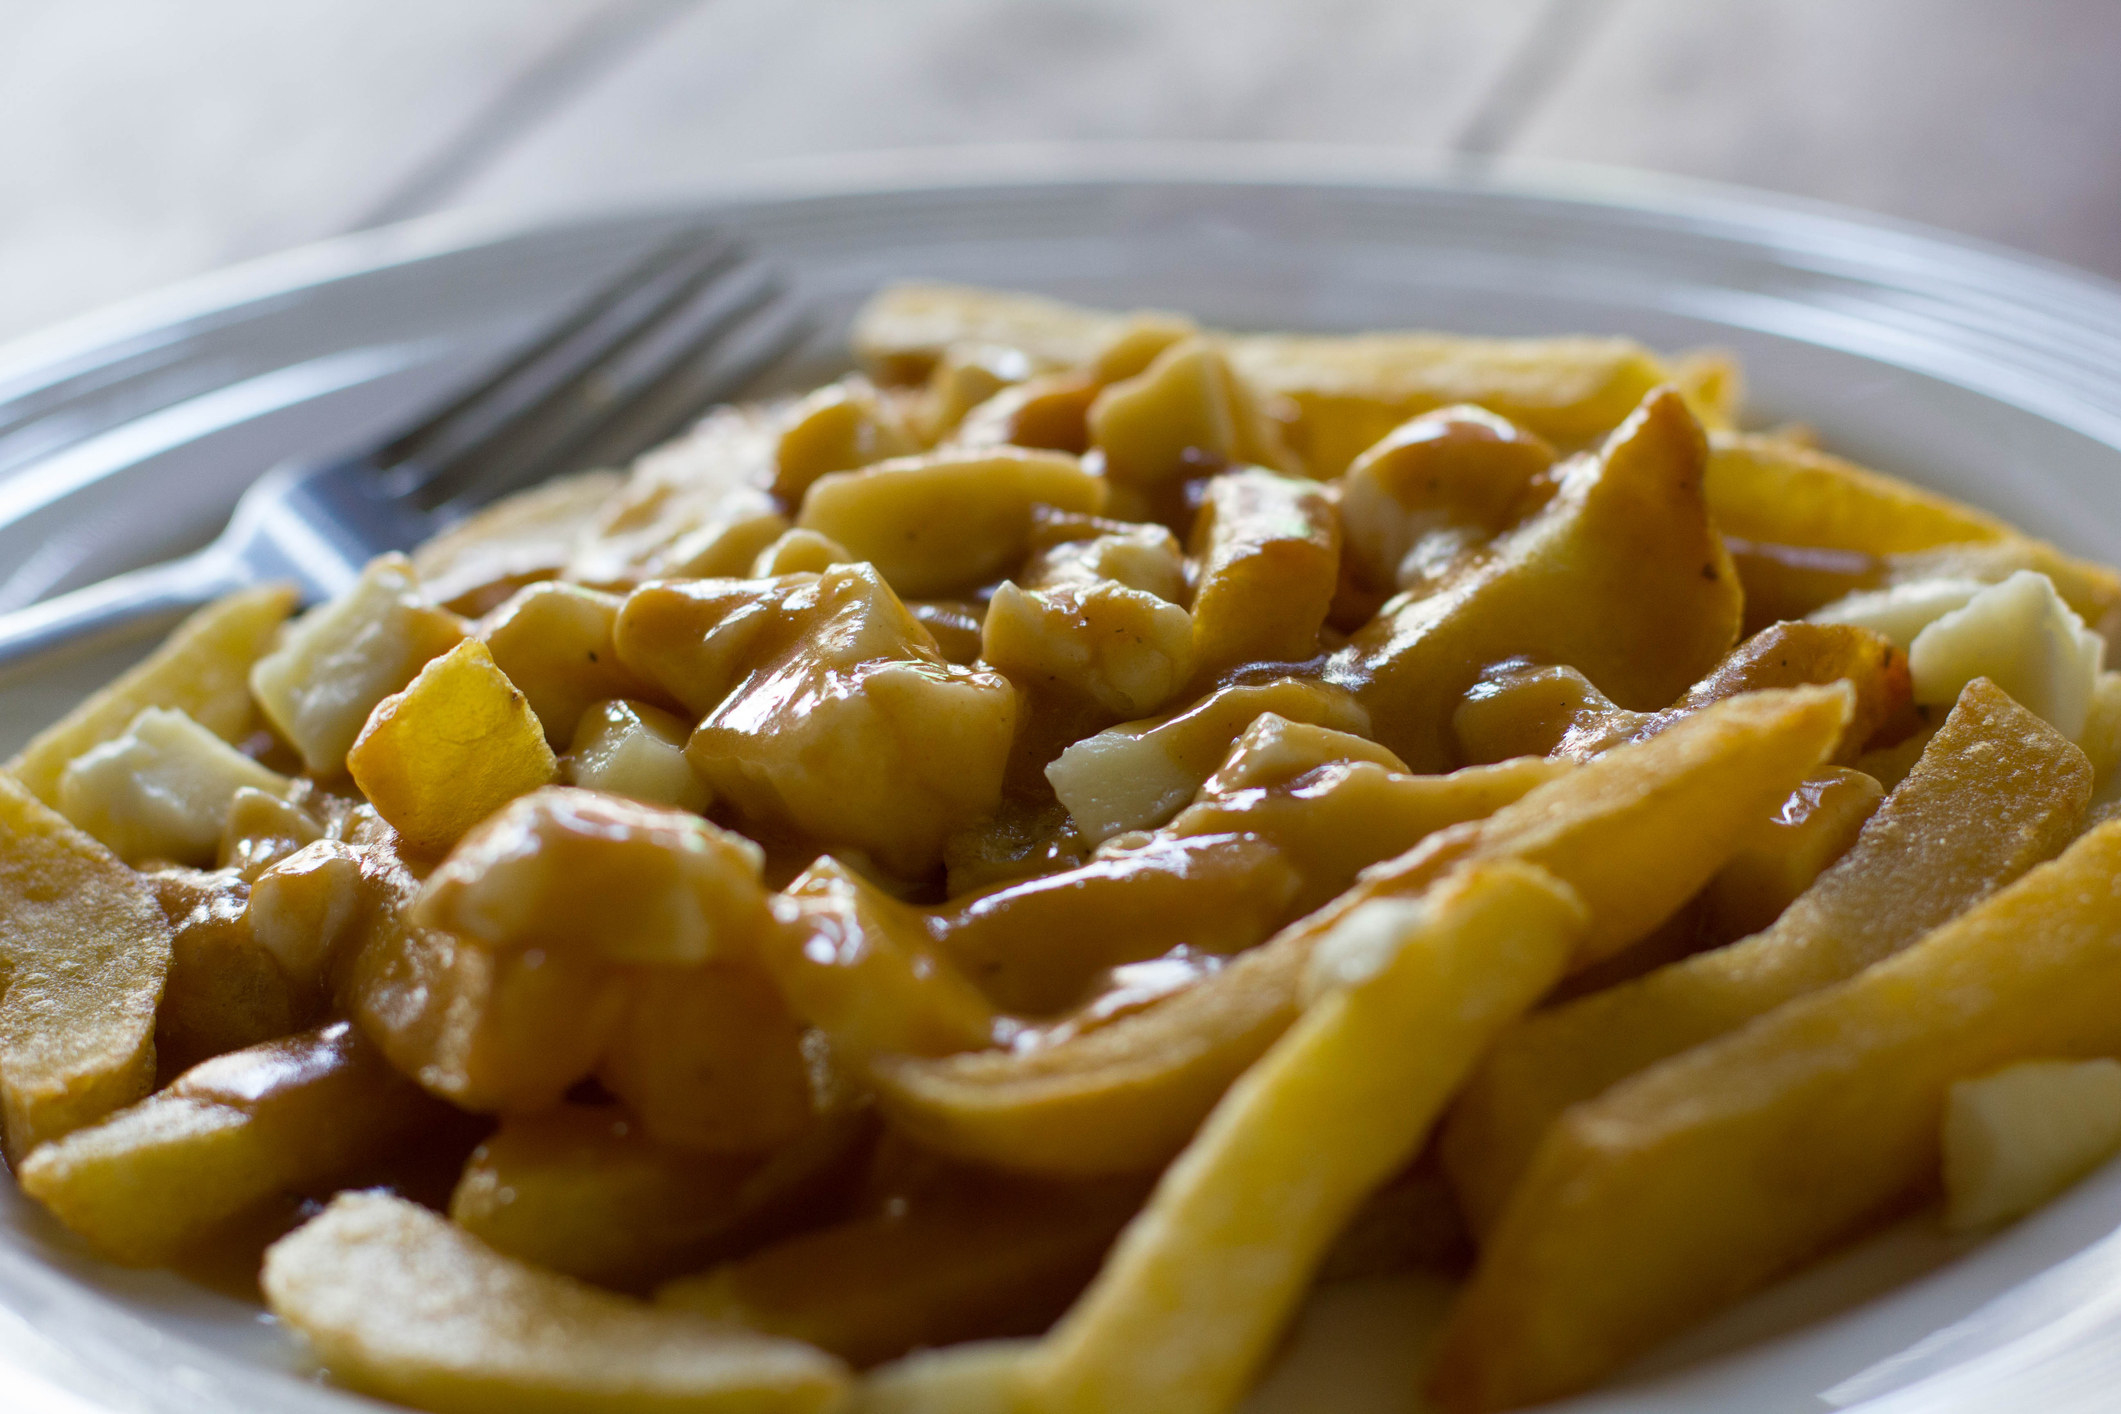 A plate of poutine with gravy and cheese curds.